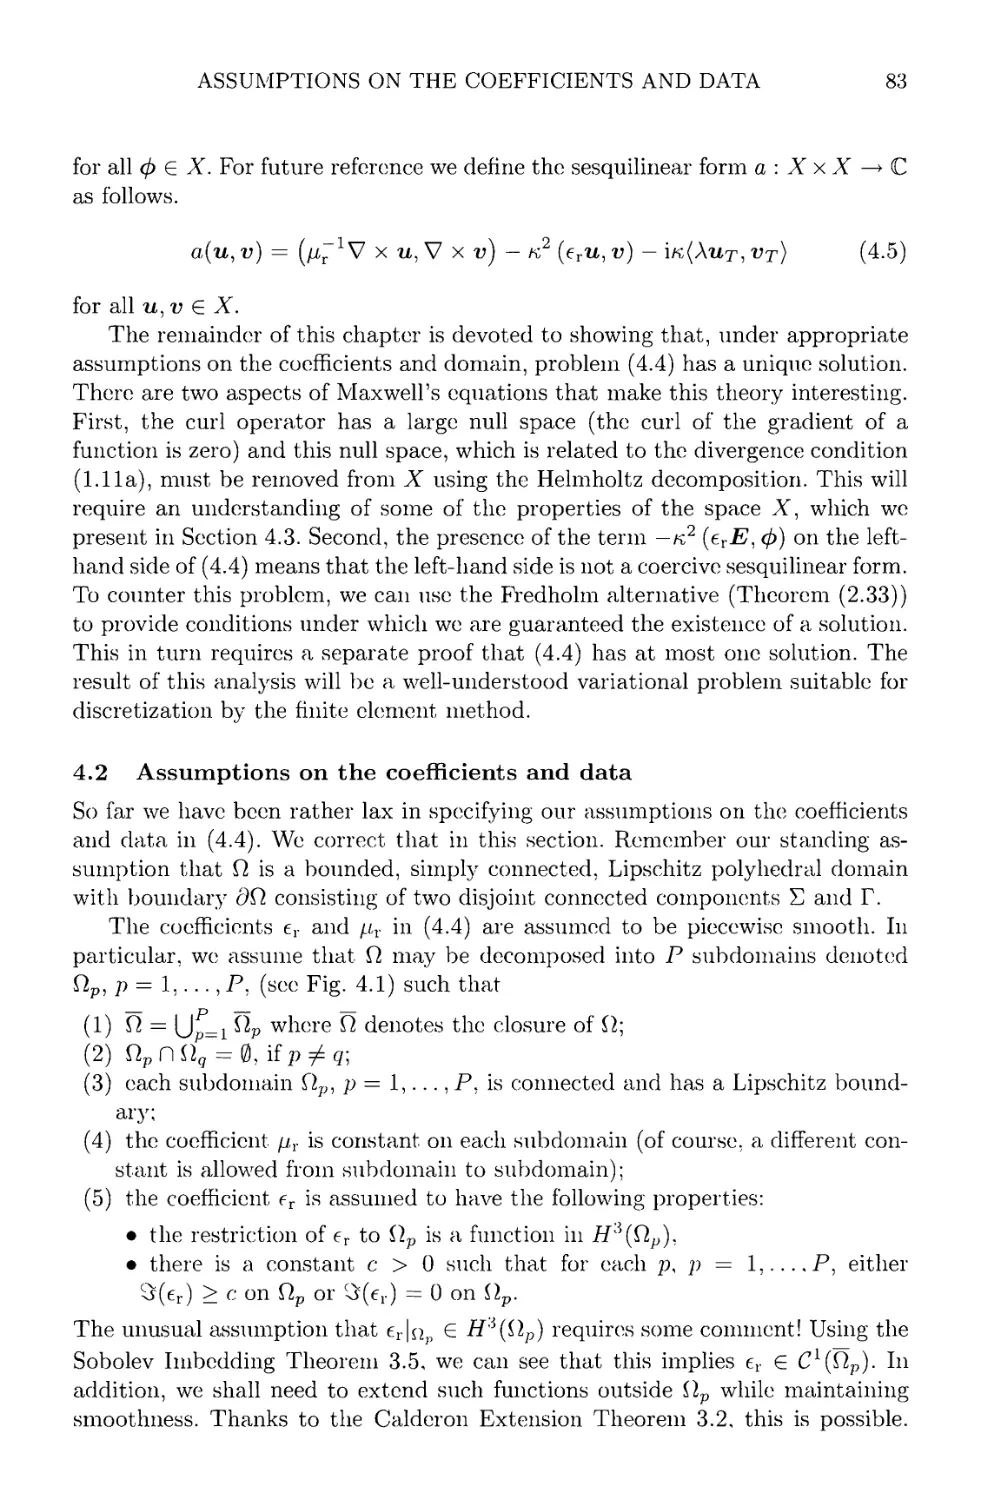 4.2 Assumptions on the coefficients and data